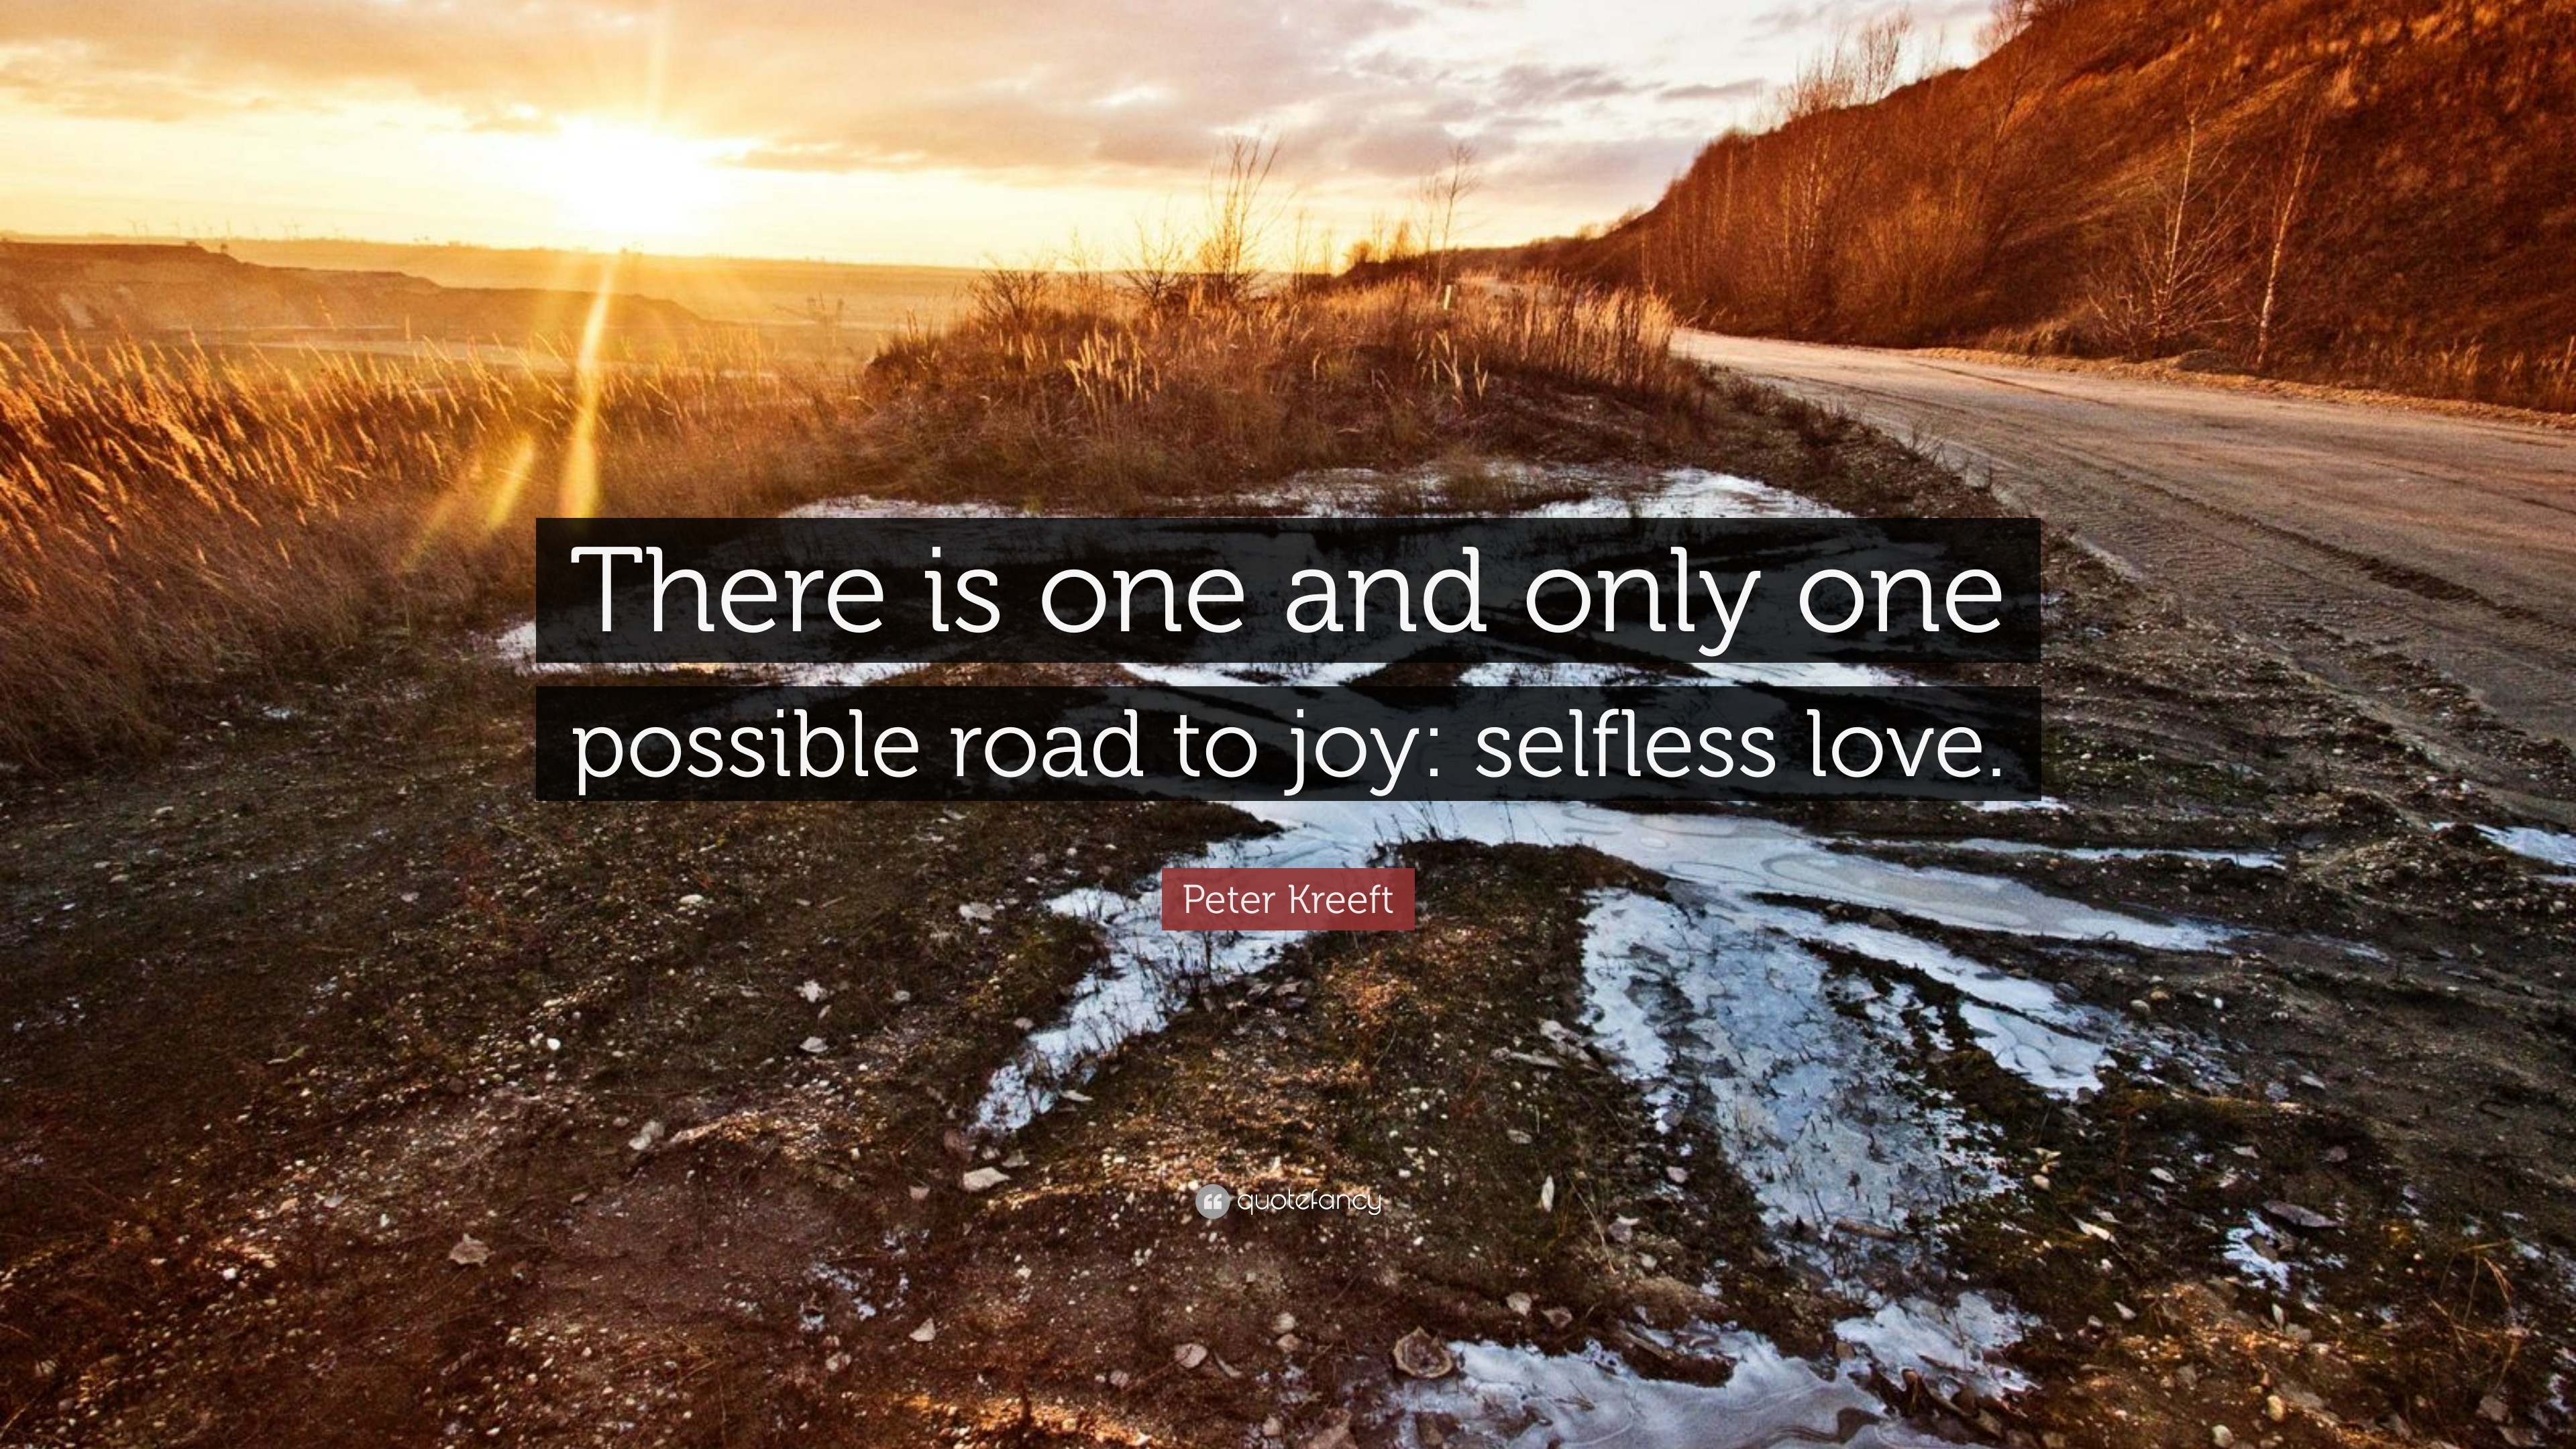 Peter Kreeft Quote “There is one and only one possible road to joy